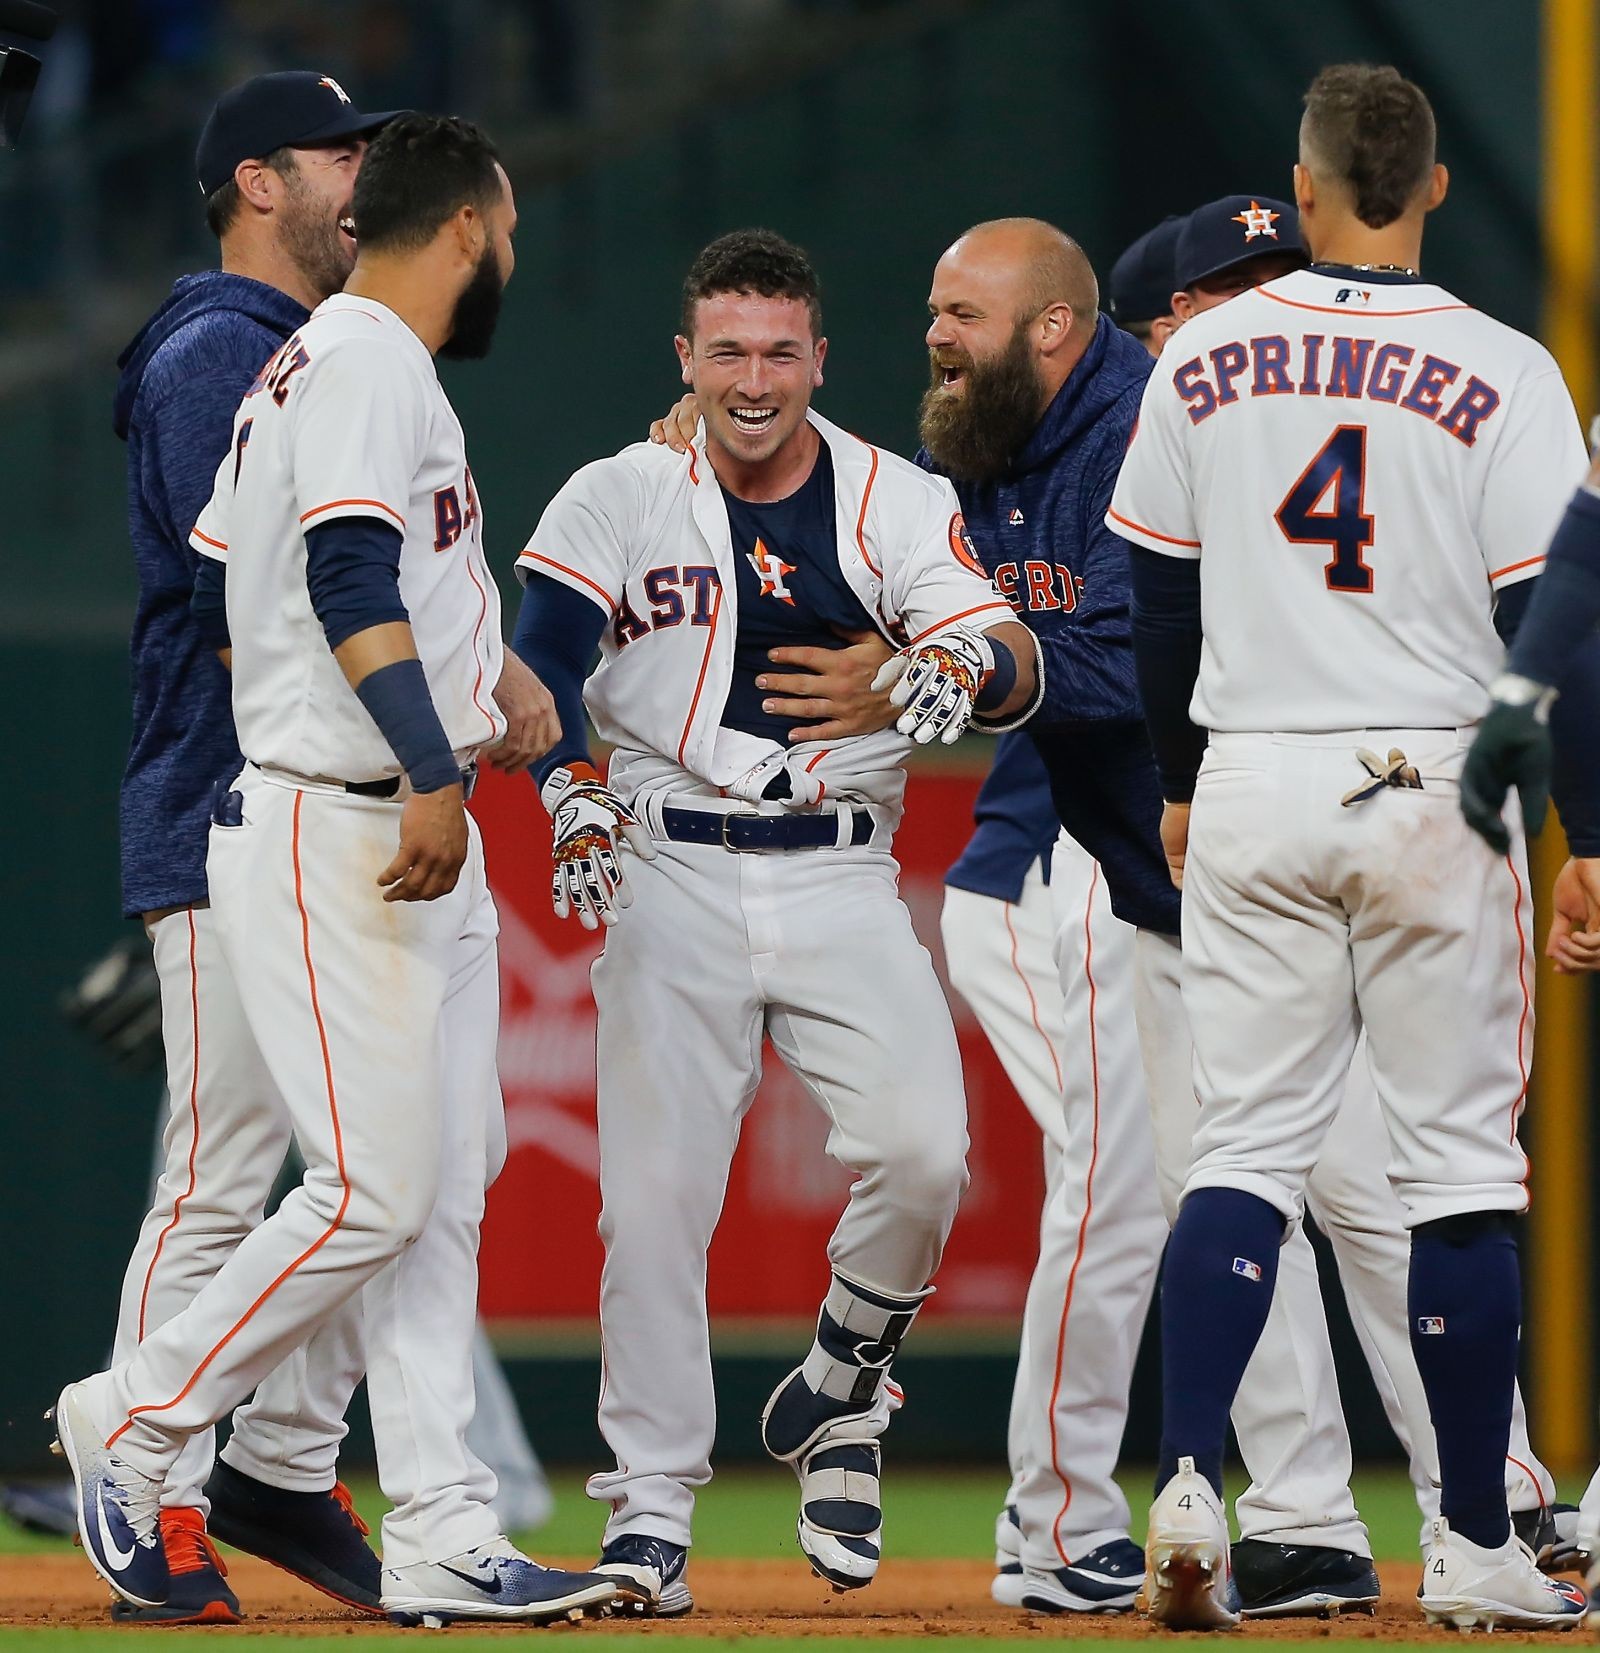 Astros get an unusual win in the 10th inning